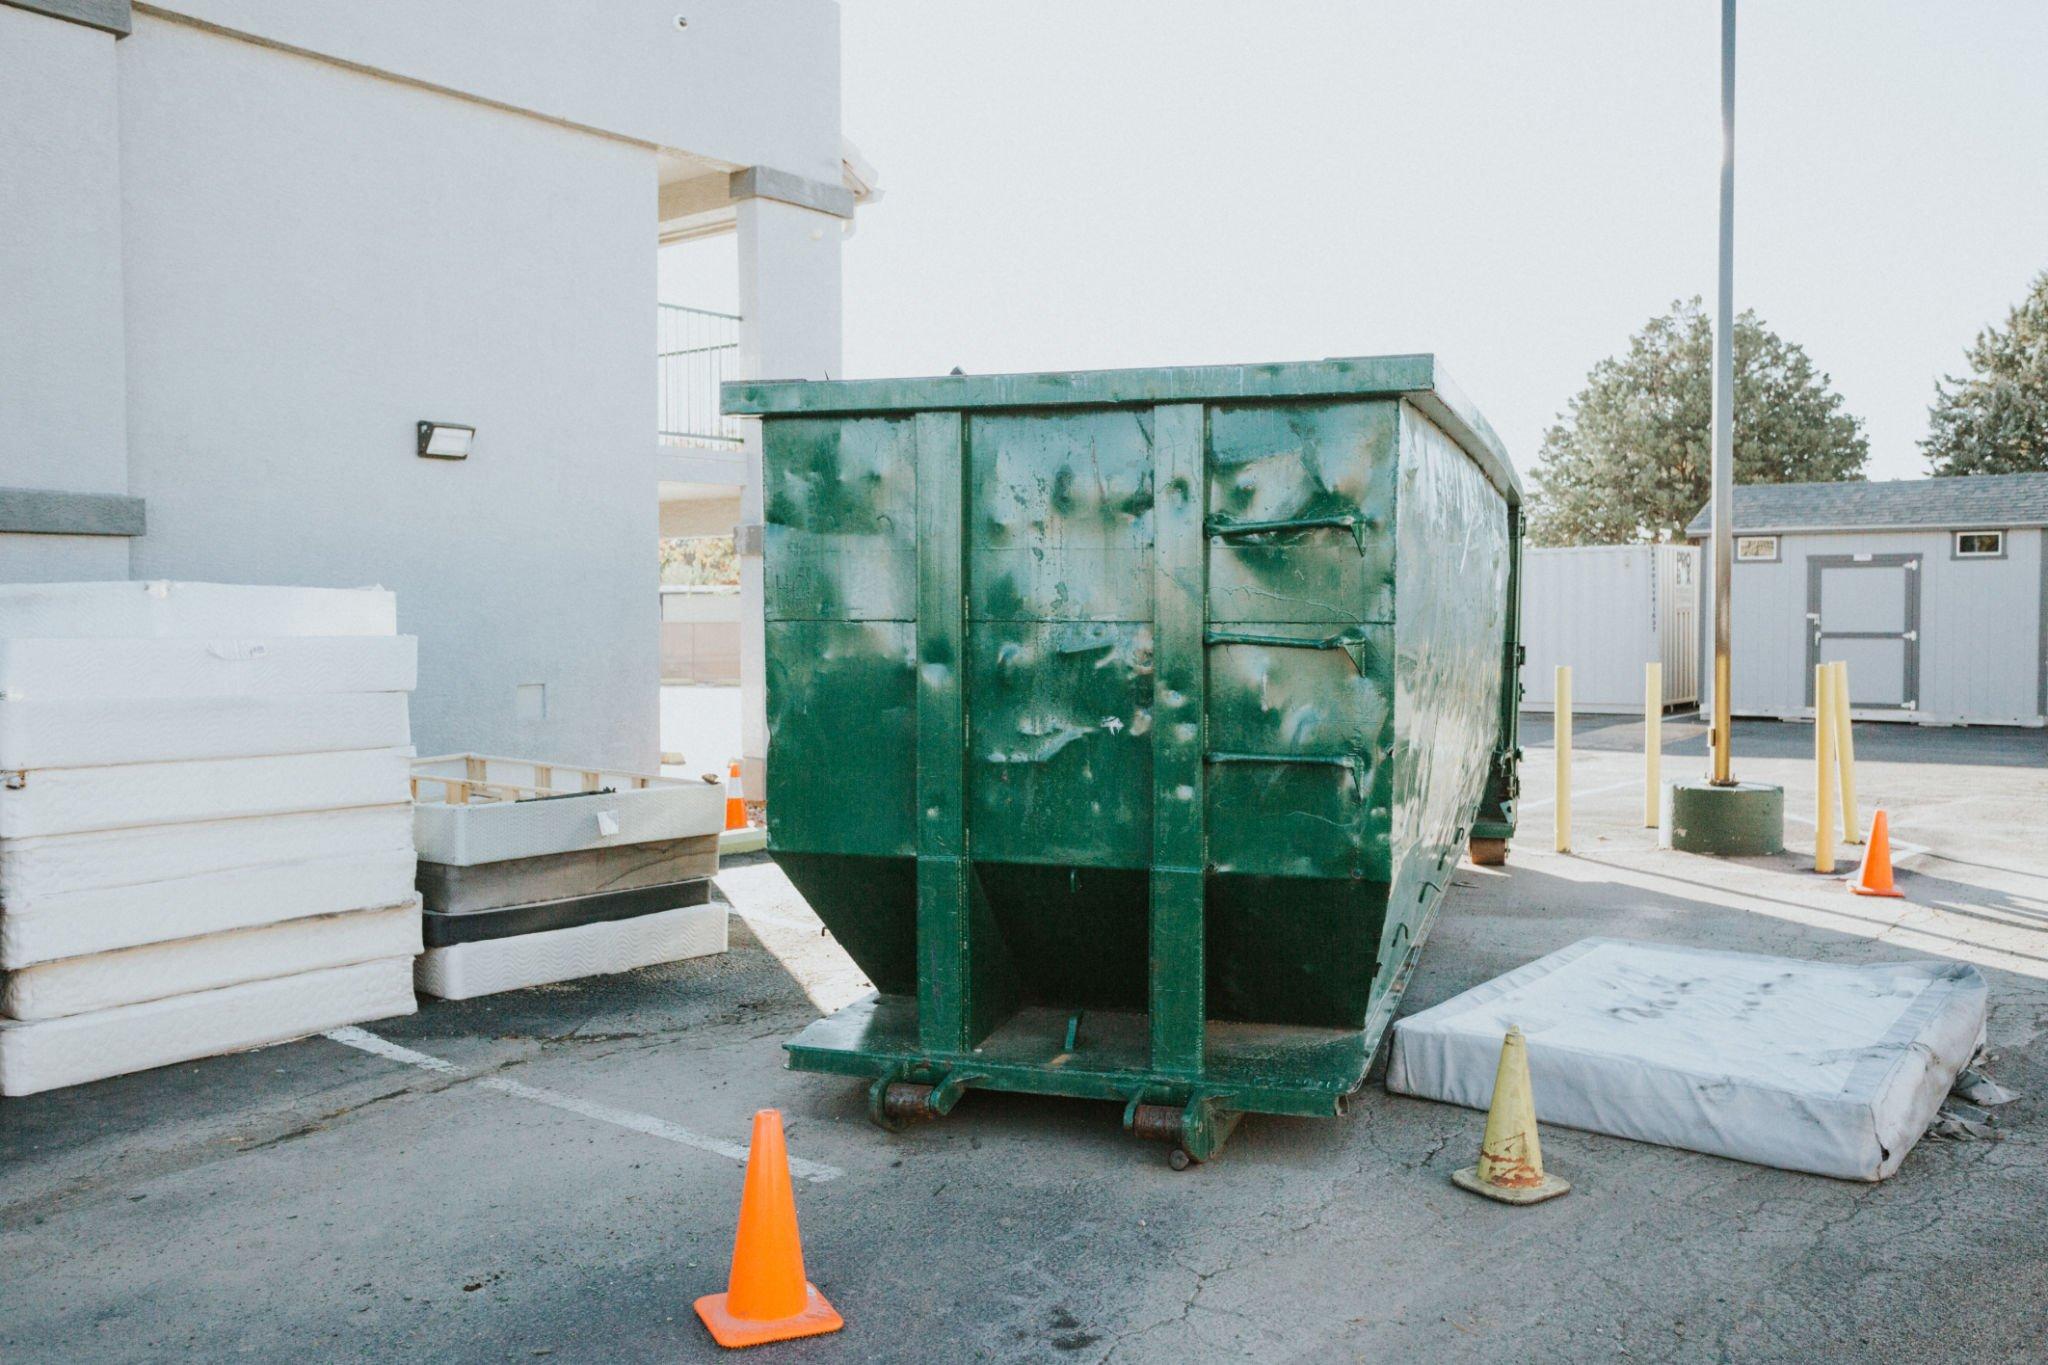 Innovative Dumpster Rental Services by Moo Moo Dumpsters Revolutionize Waste Management 